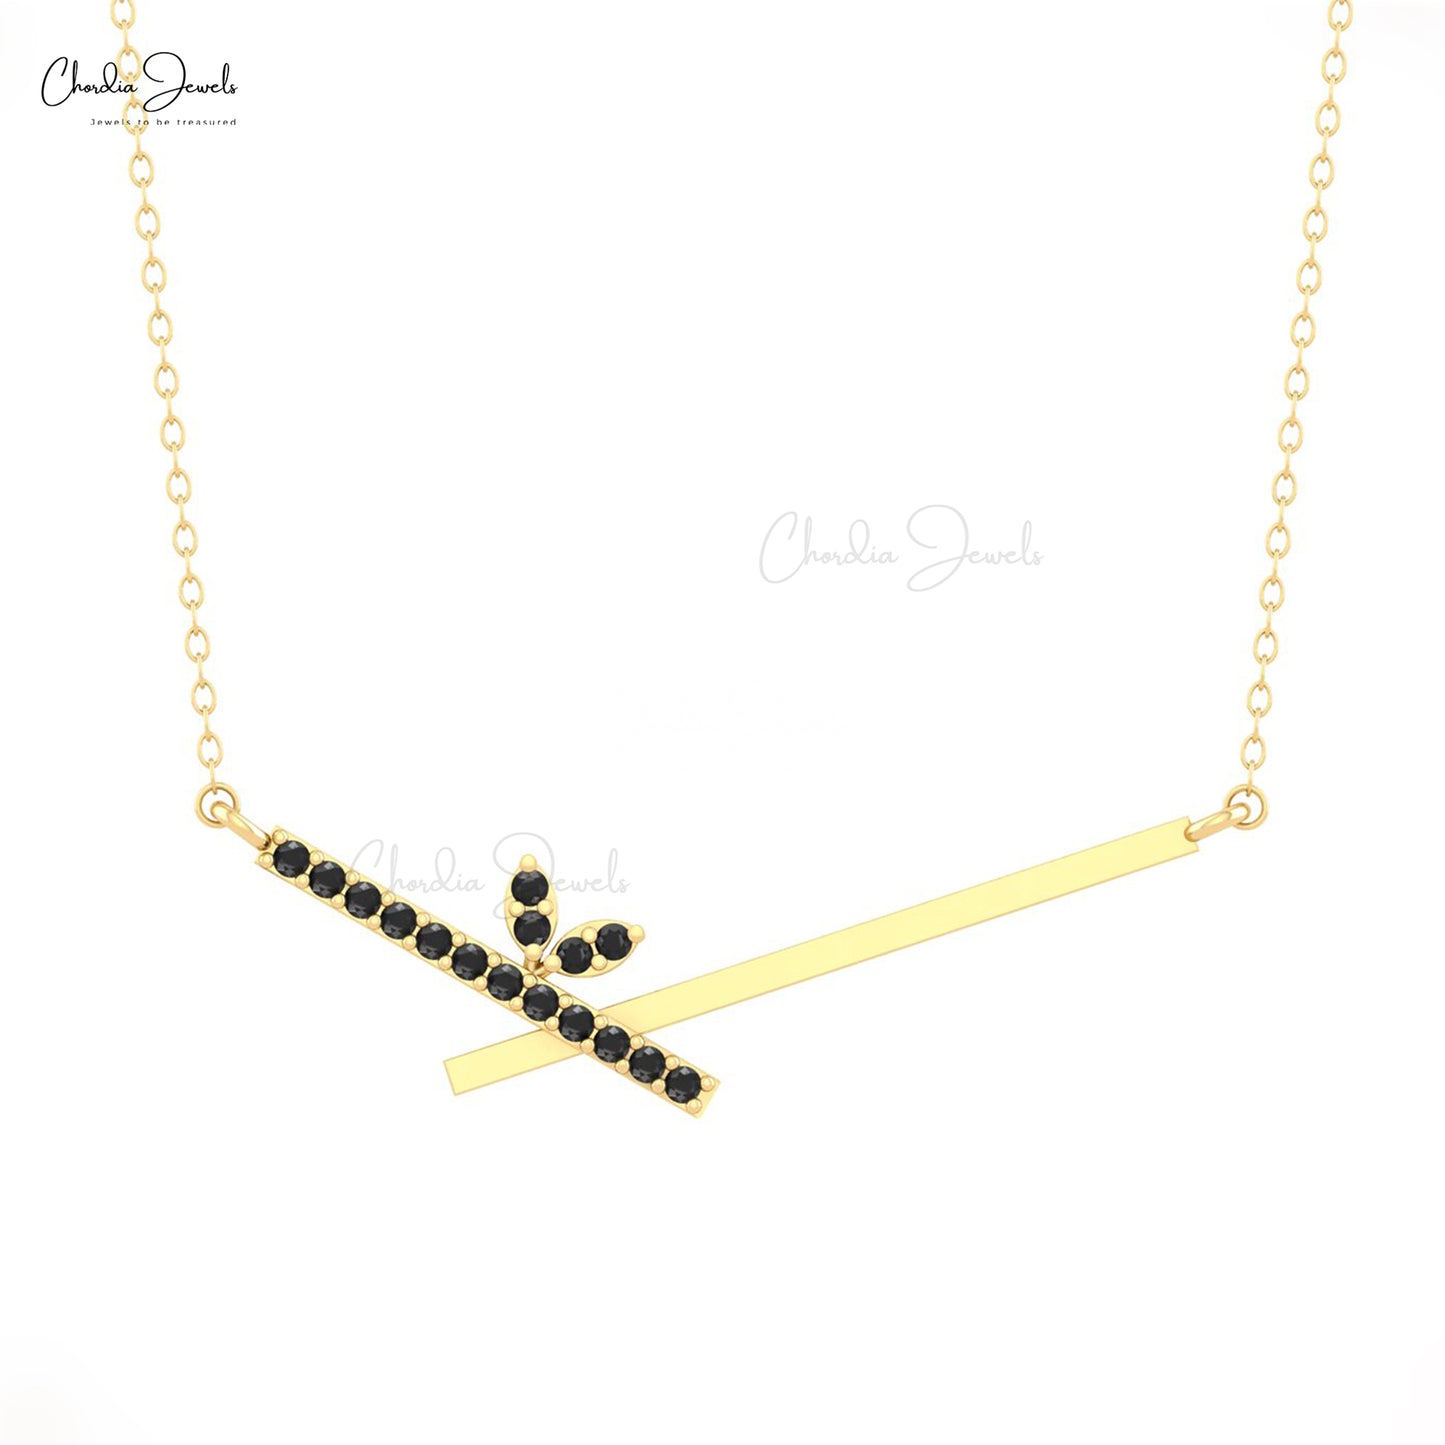 Authentic Black Diamond Chevron Bar Necklace 14k Real Gold Modern Jewelry For Wedding Gift